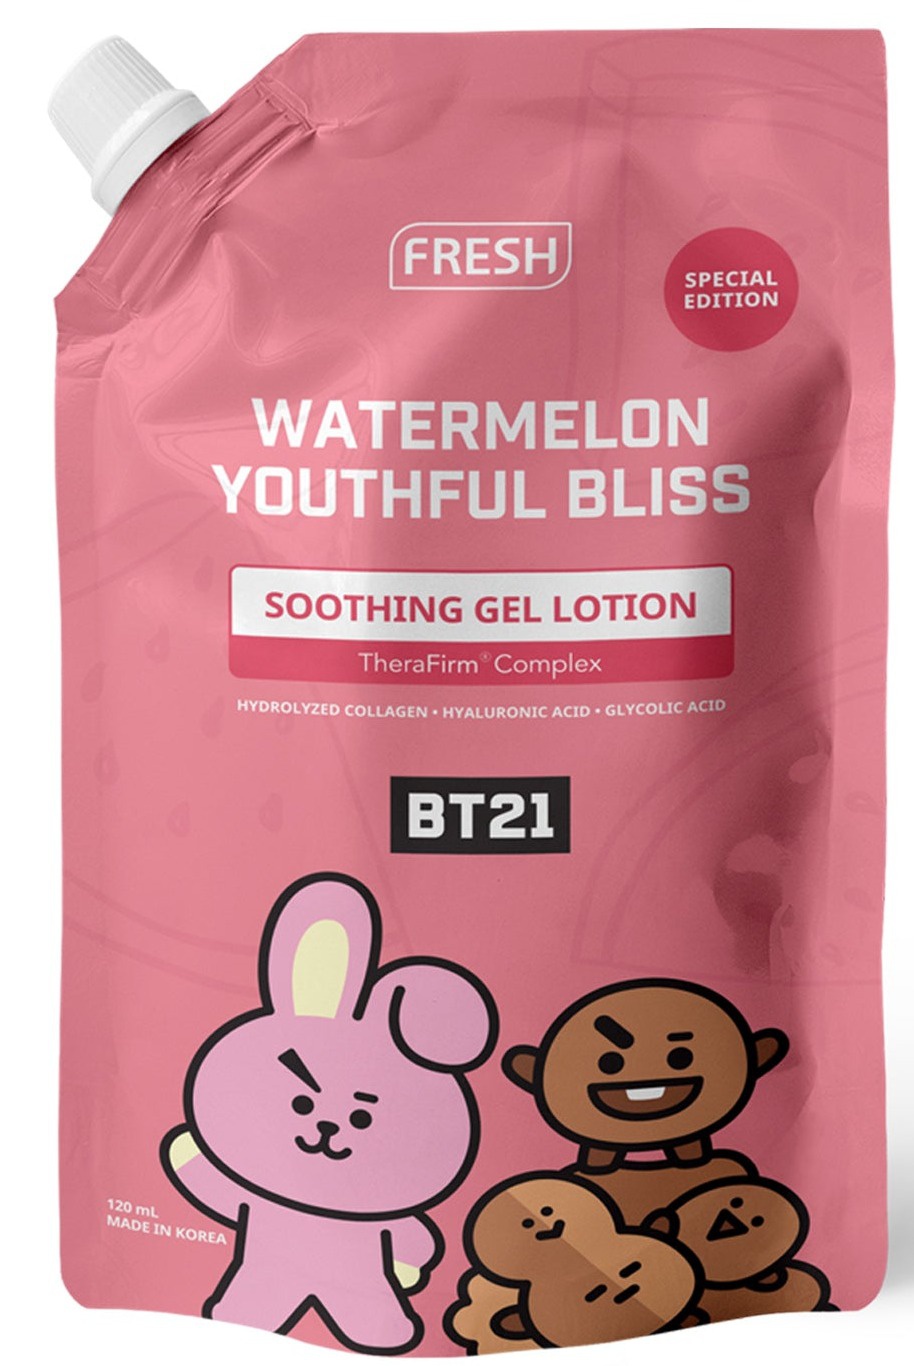 Fresh Bt21 Watermelon Youthful Bliss Soothing Gel Lotion